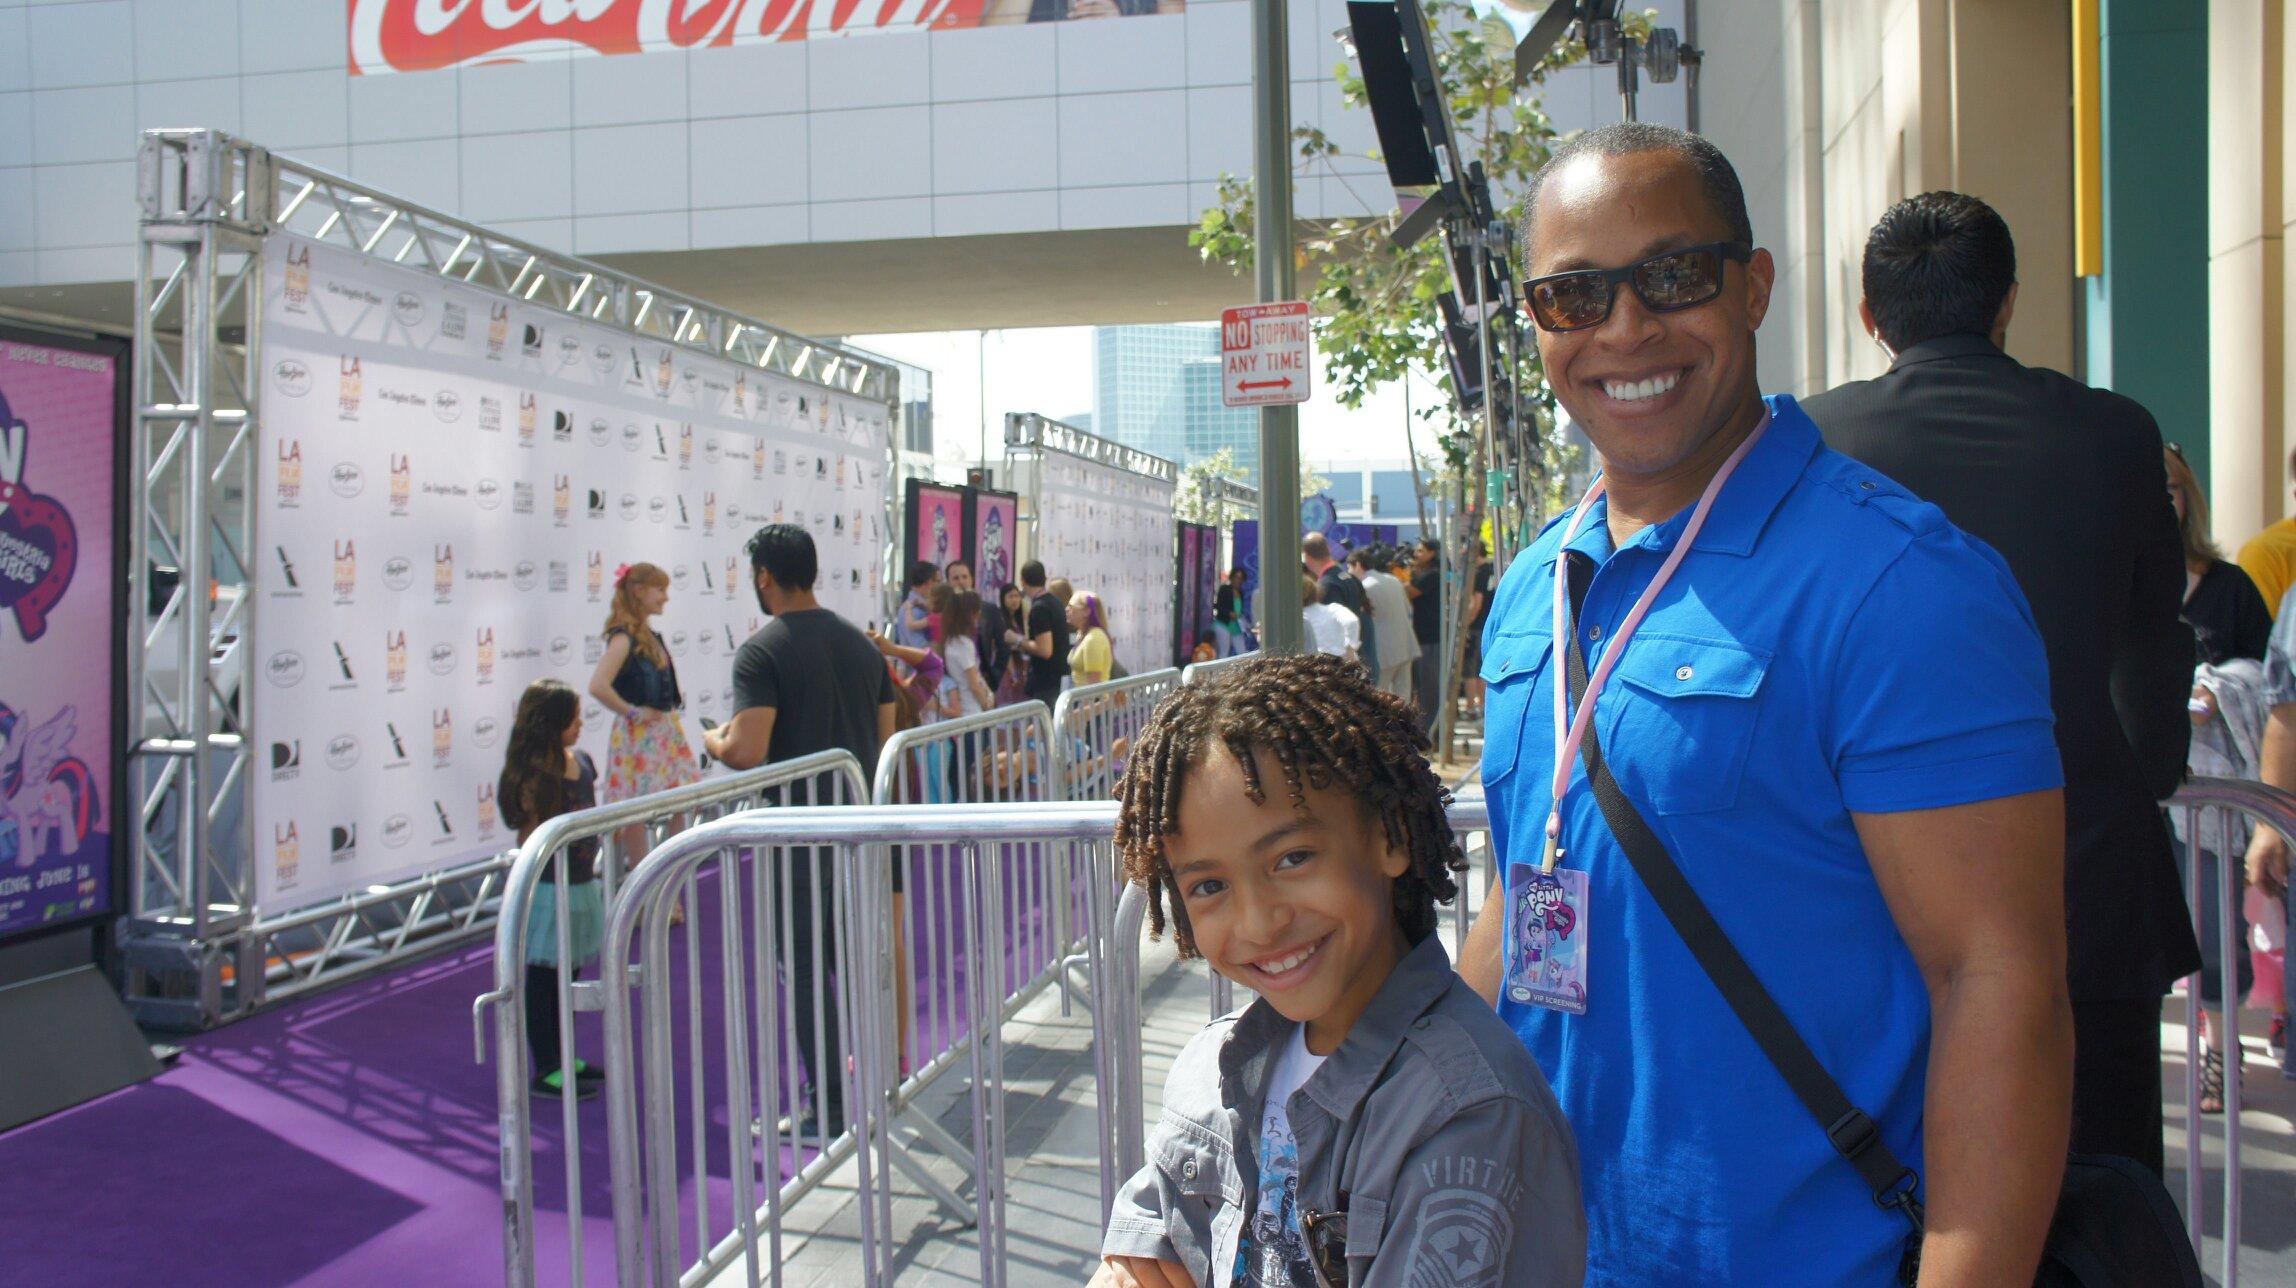 Erik Betts and Jaden Betts at My Little Pony: Equestria Girls premiere